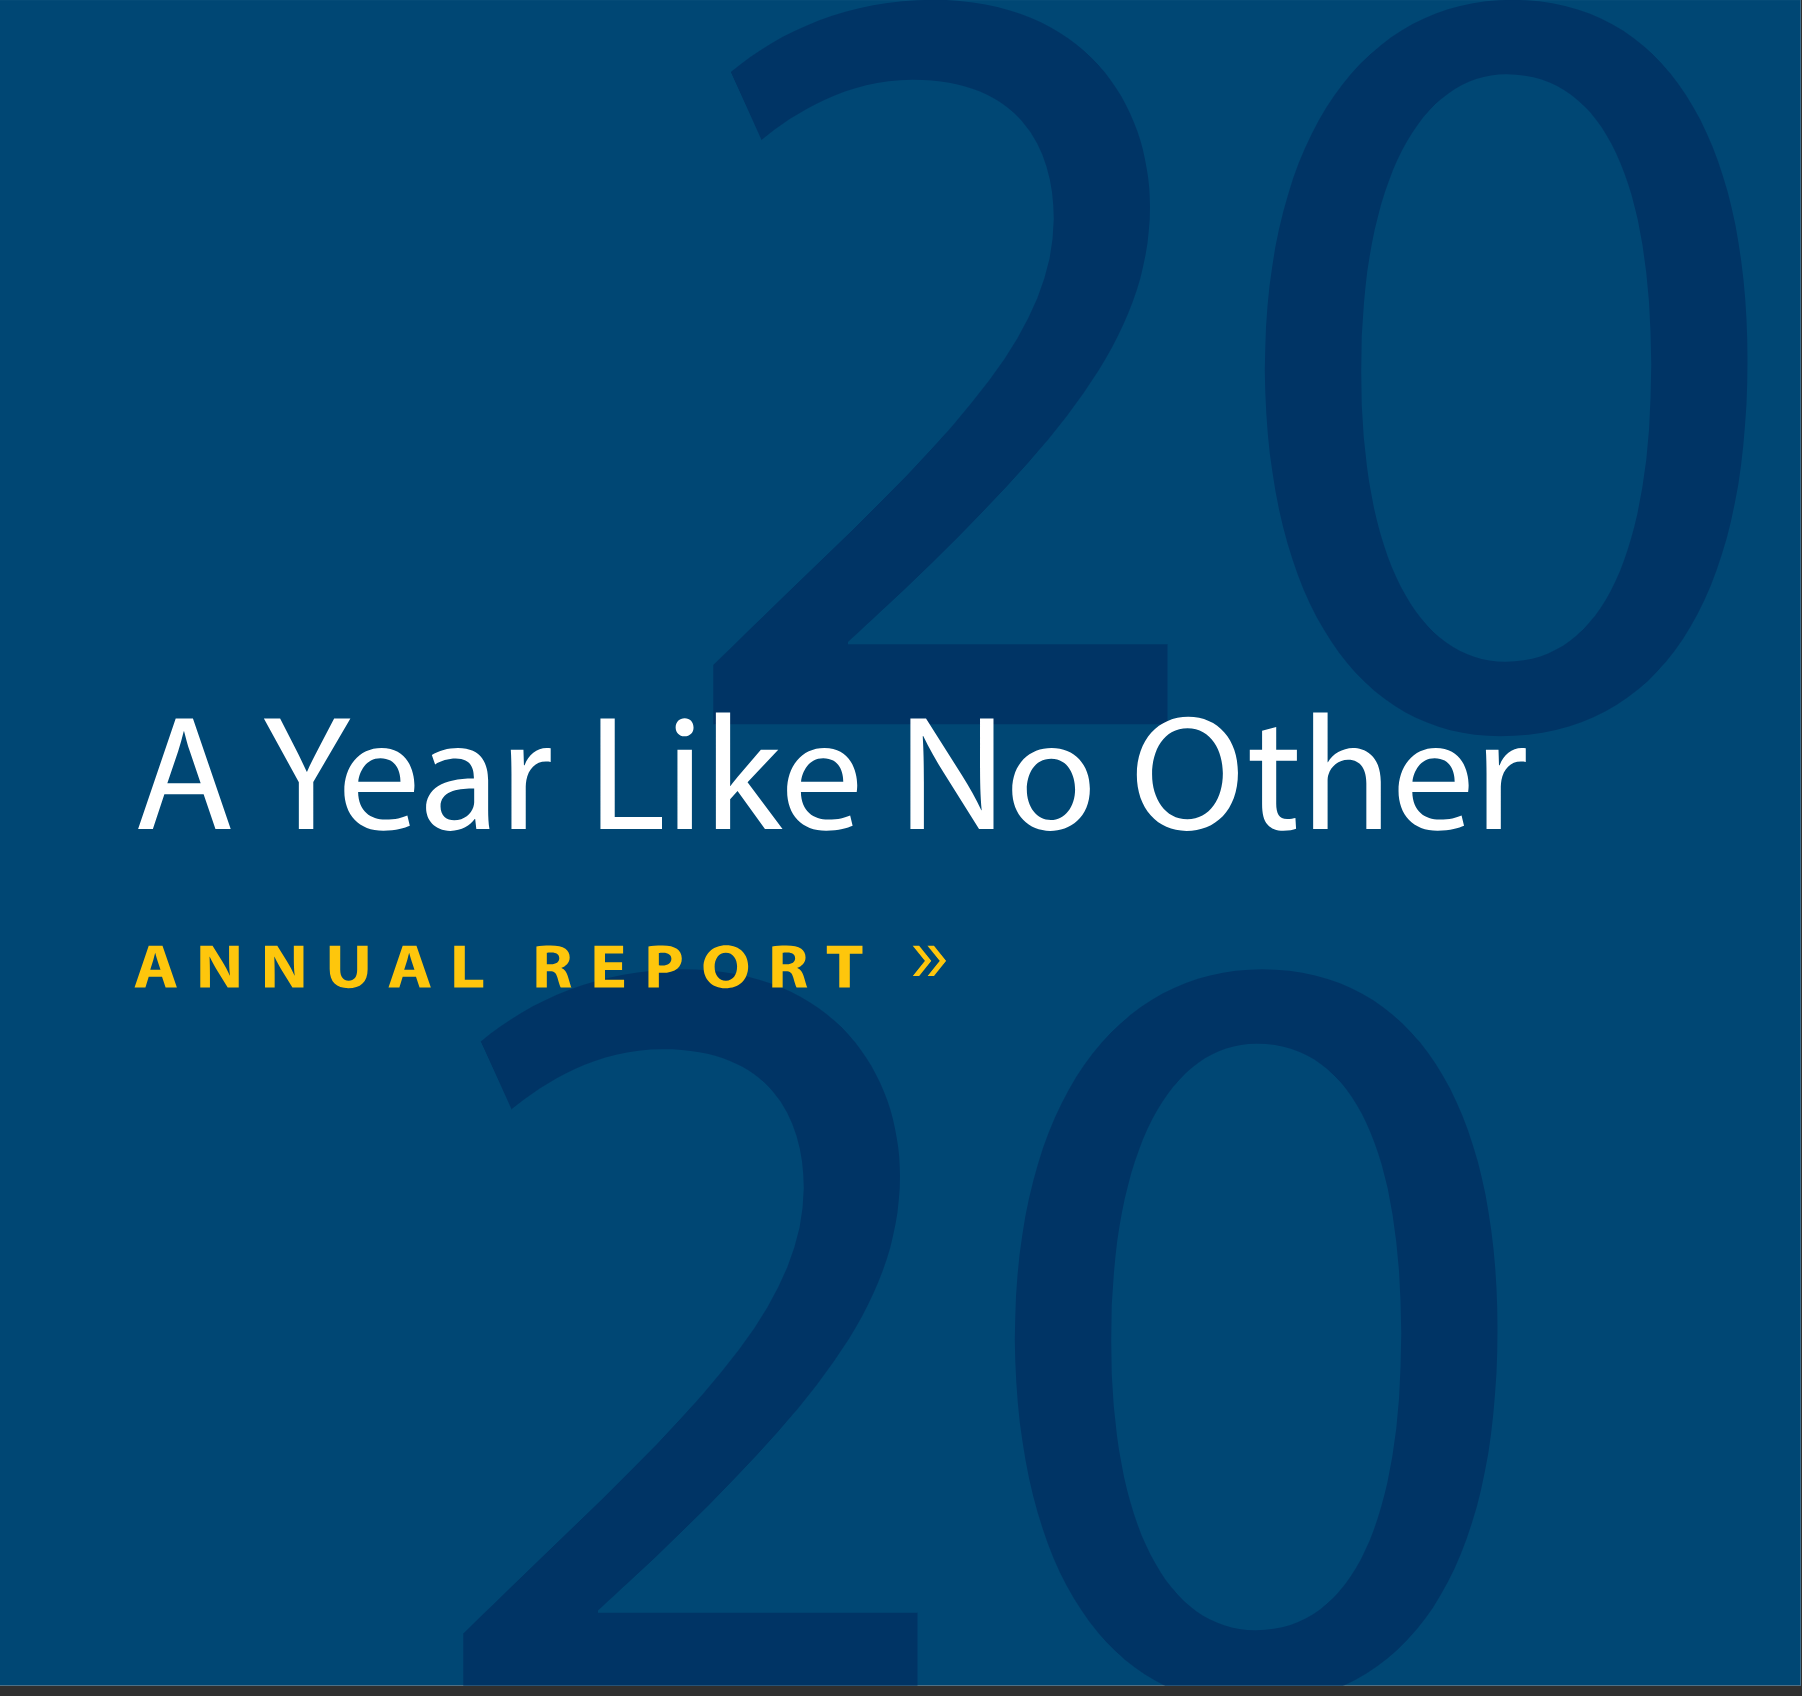 RIHousing 2019 Annual Report: We'll Get You Home